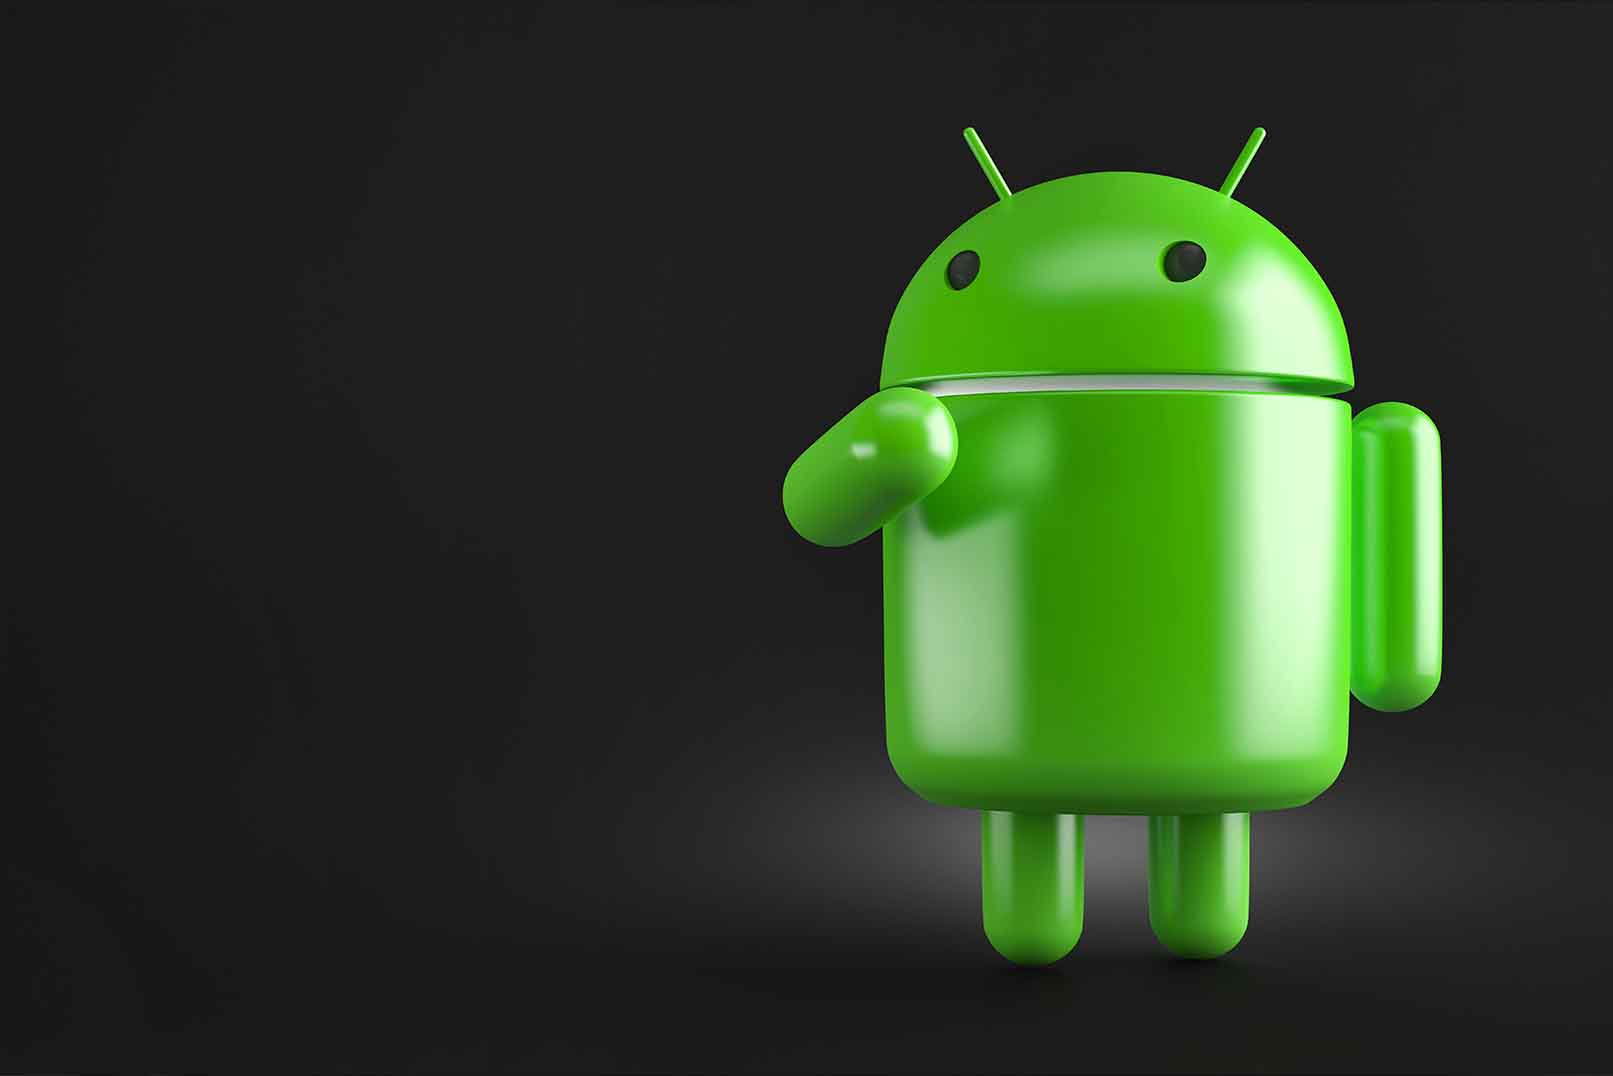 Hiring Android App Development Company for Your Next Mobile App Project